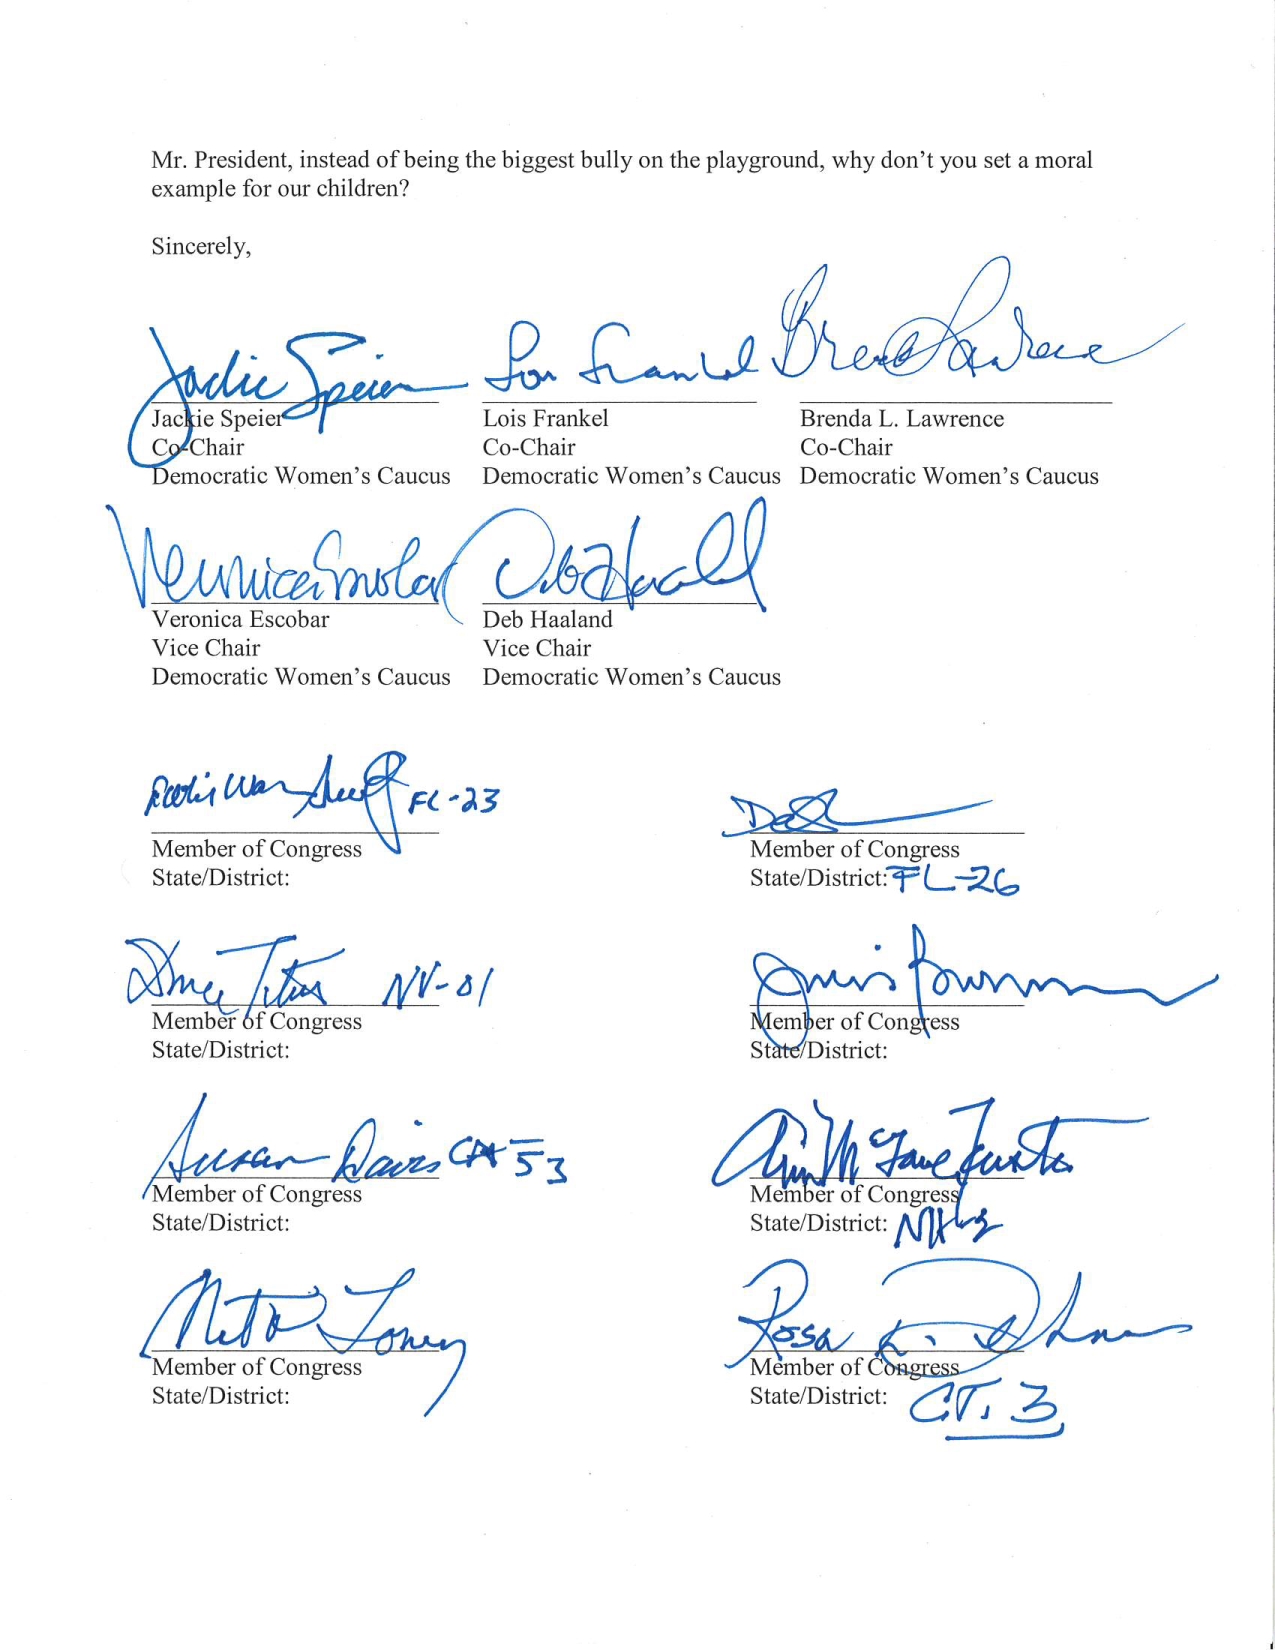 50 Congresswomen Call Out Donald Trump’s Misogyny In Searing Open Letter; EPnzf9TXsAEn68o?format=jpg&name=large